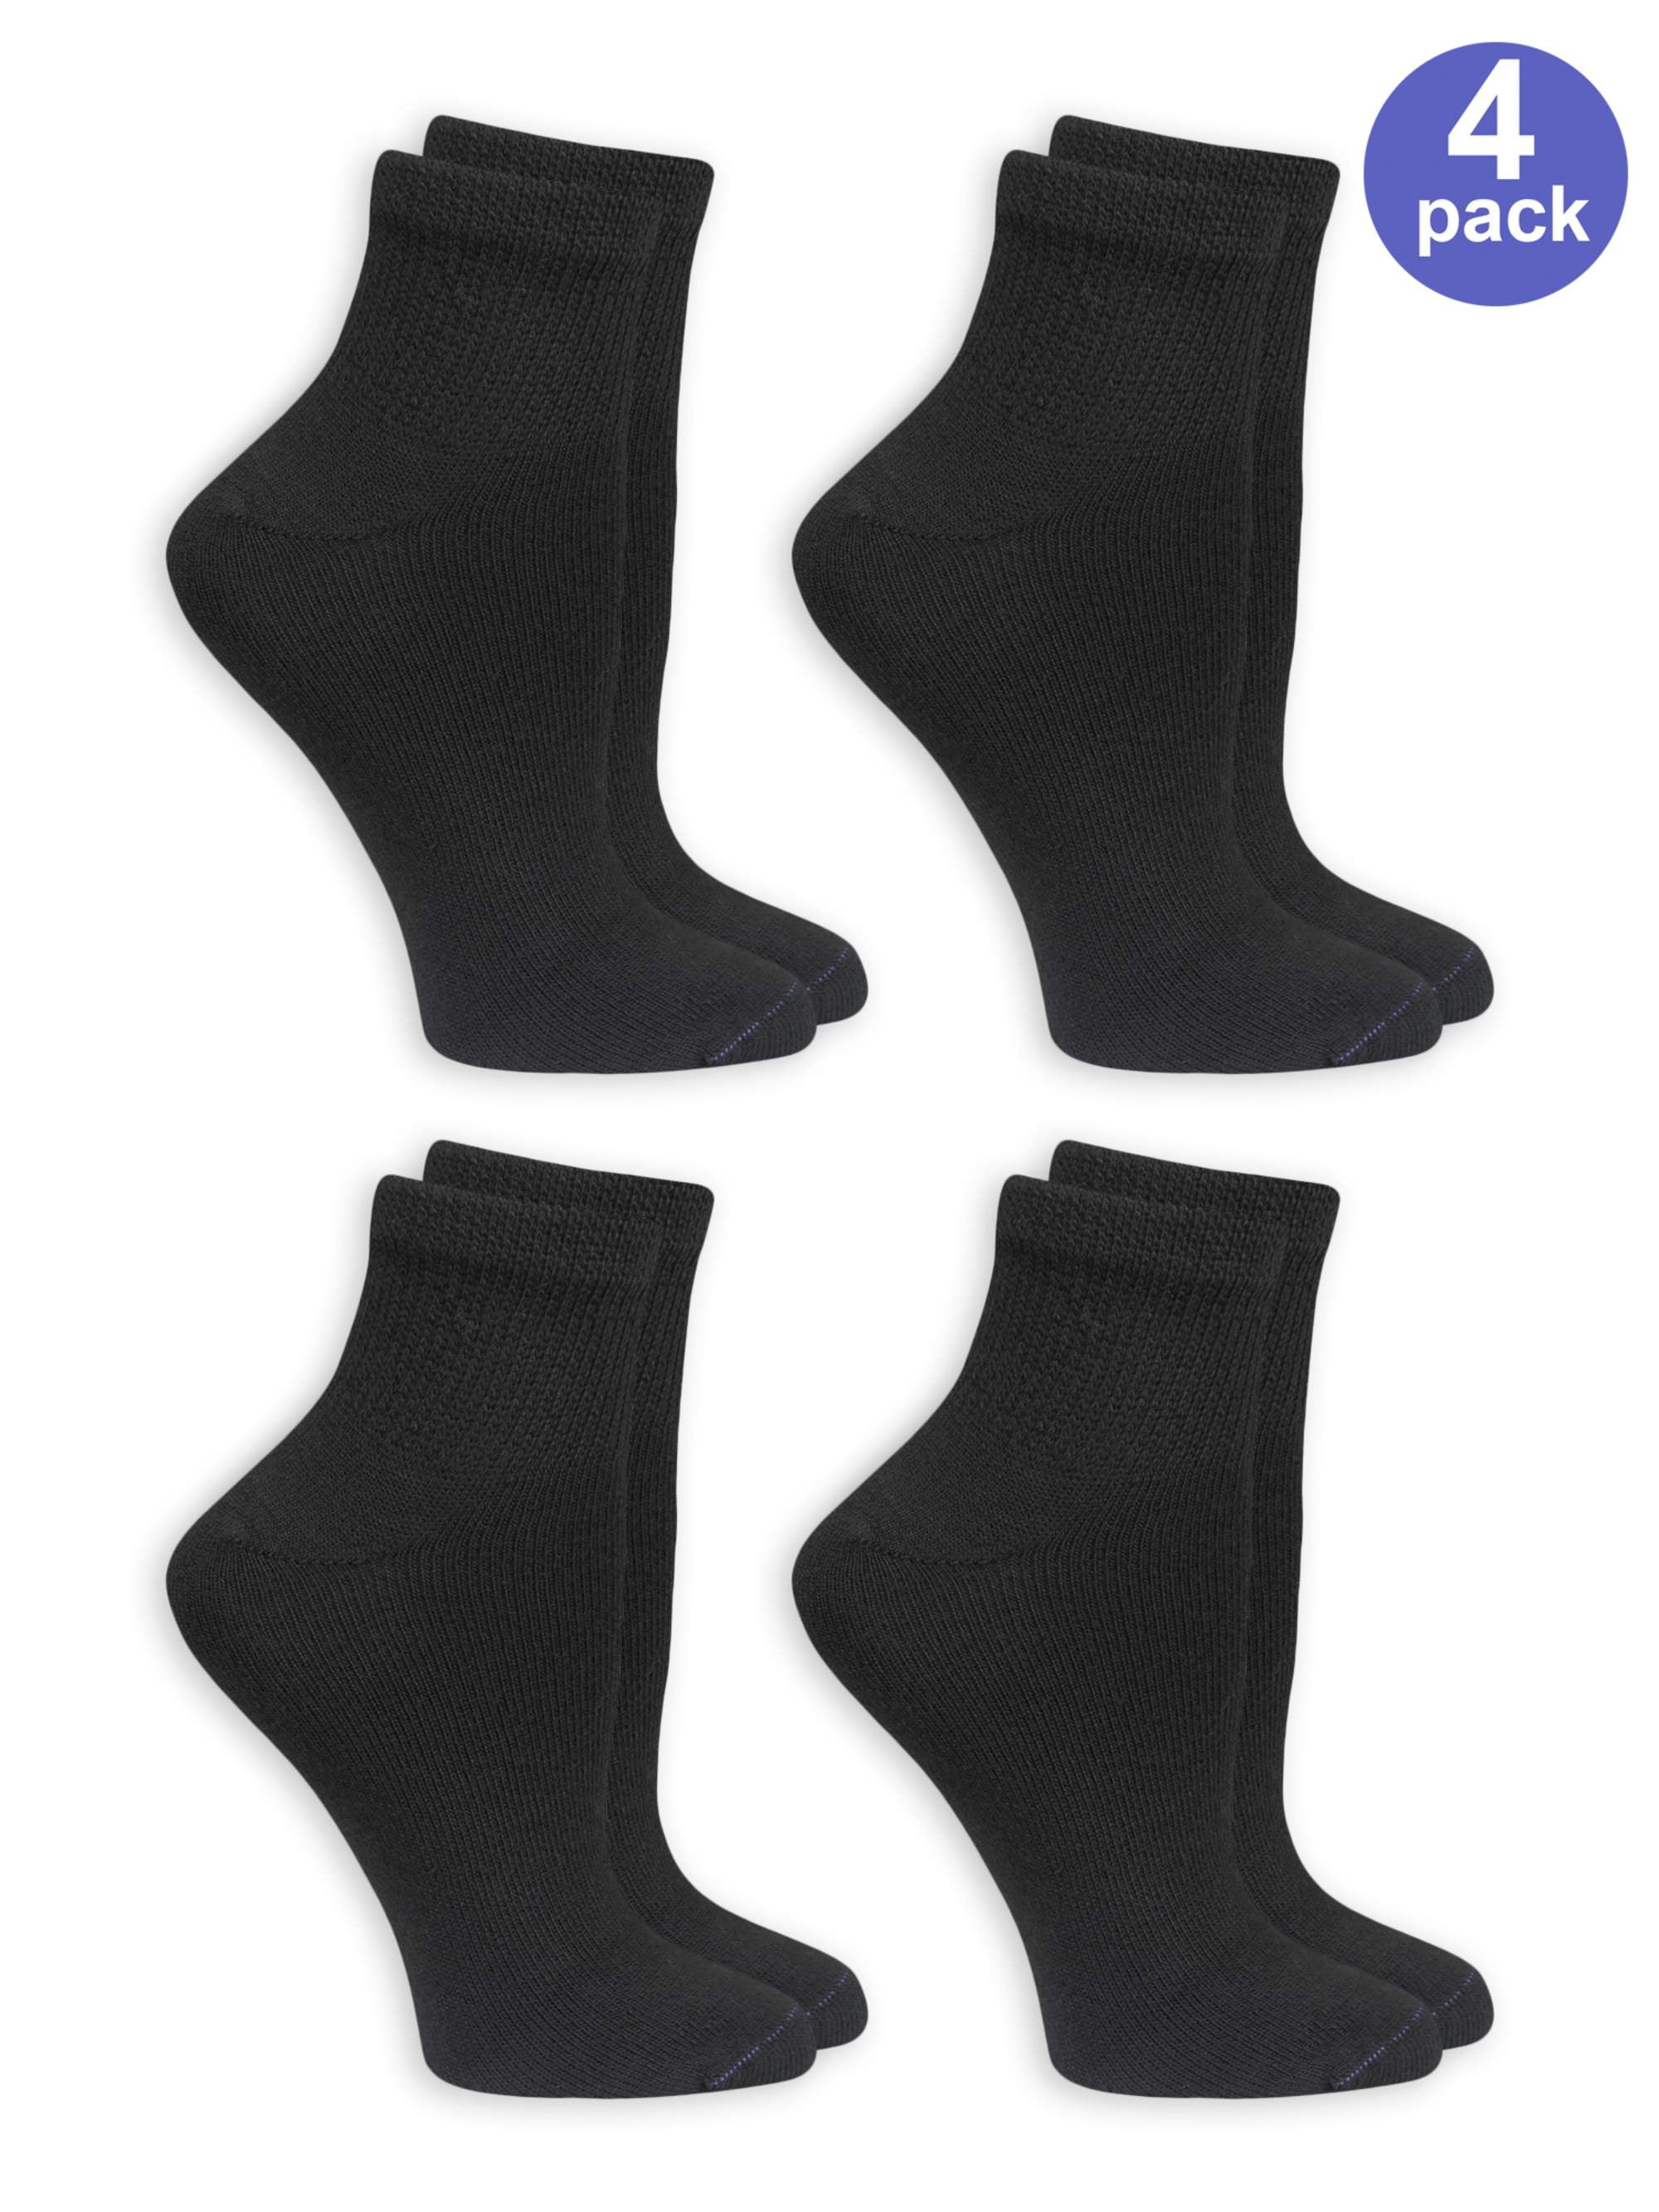 Dr.Scholl's Women's Relaxed Fit Ankle Socks, 4 Pack - Walmart.com